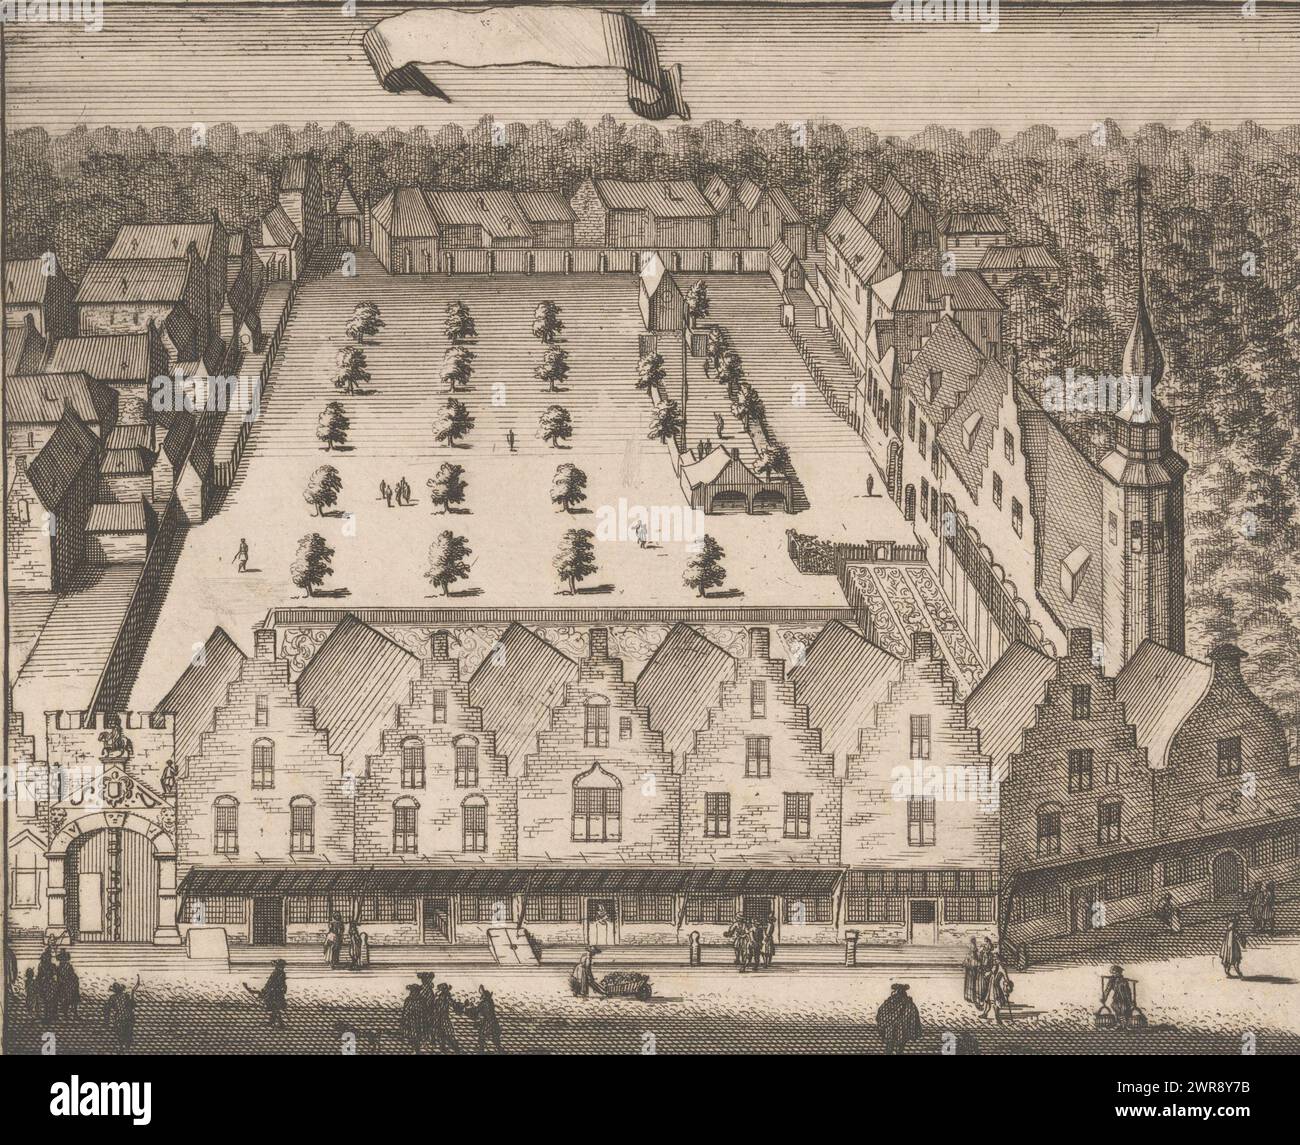 View of the Sint-Sebastiaansdoelen in Middelburg, View of the Sint-Sebastiaansdoelen - also known as the shooting court of the Noble Longbow - in Middelburg., print maker: anonymous, in or before 1696, paper, etching, engraving, height 136 mm × width 167 mm, print Stock Photo